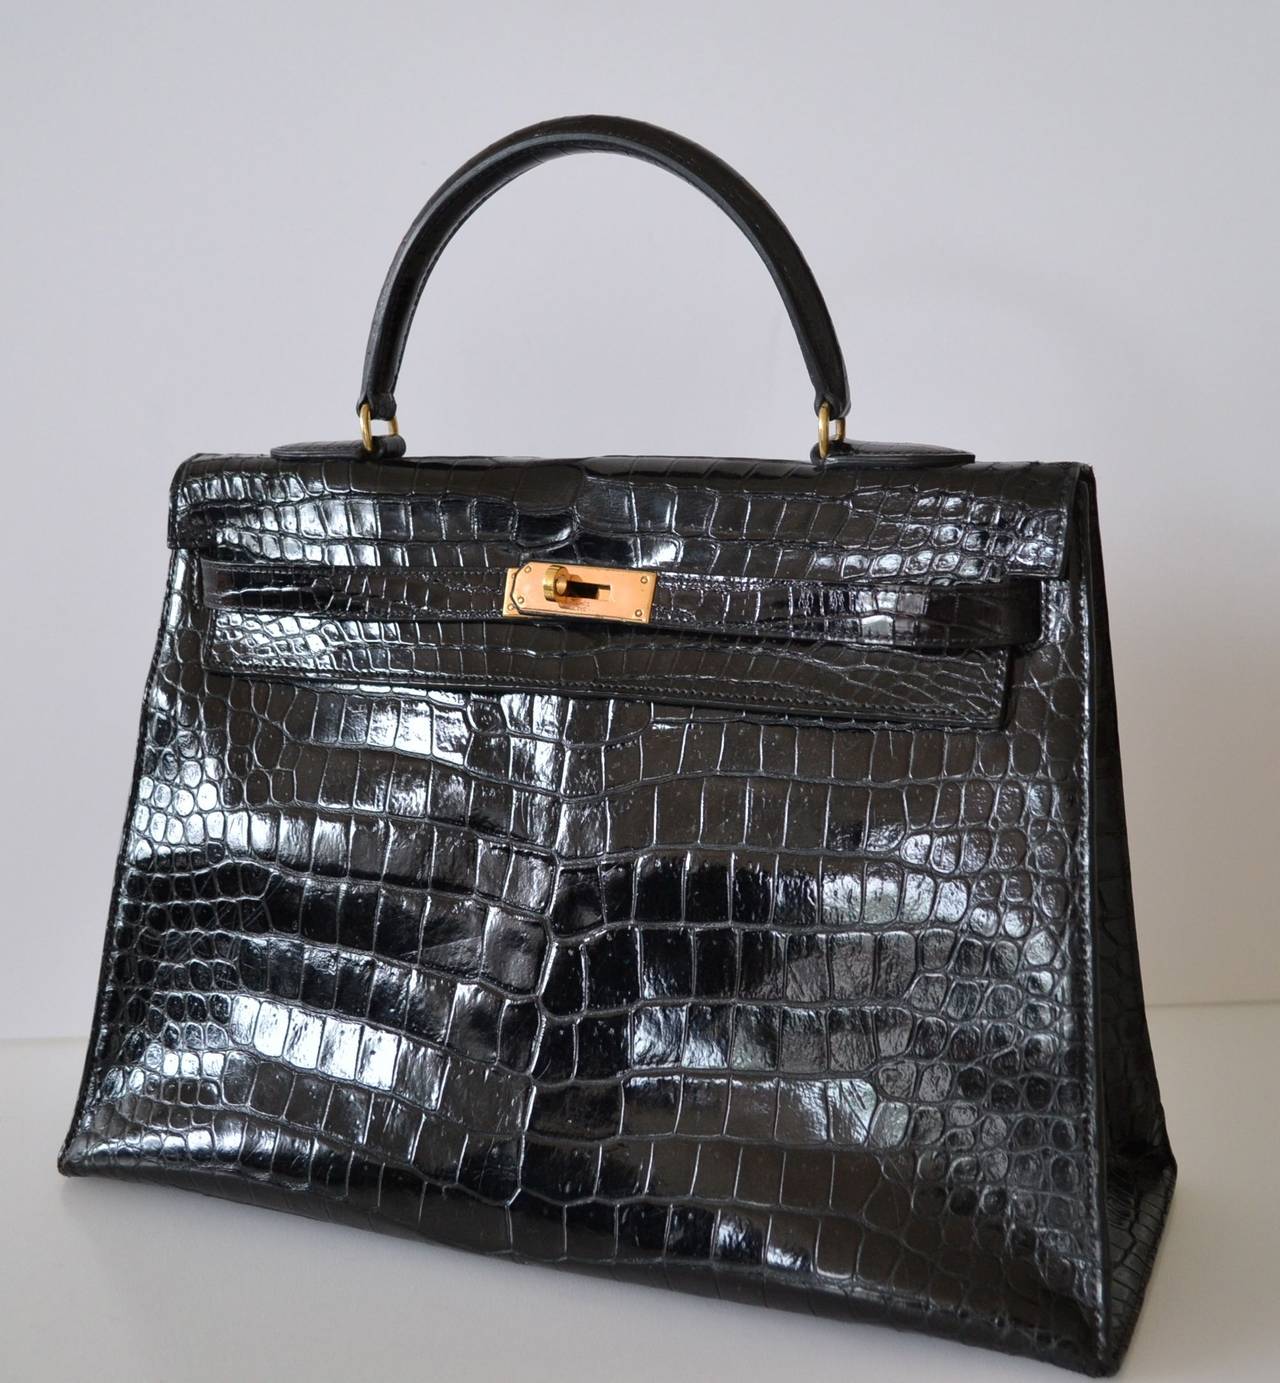 Hermes Kelly 35 Crocodile Porosus
 
Back color - shiny
Crocodylus Porosus
 
Chevre (goat) lining
Very good condition
Handle is perfect
Hardware are in normal use
Interior is in good condition, odorless
Cornes are very good without